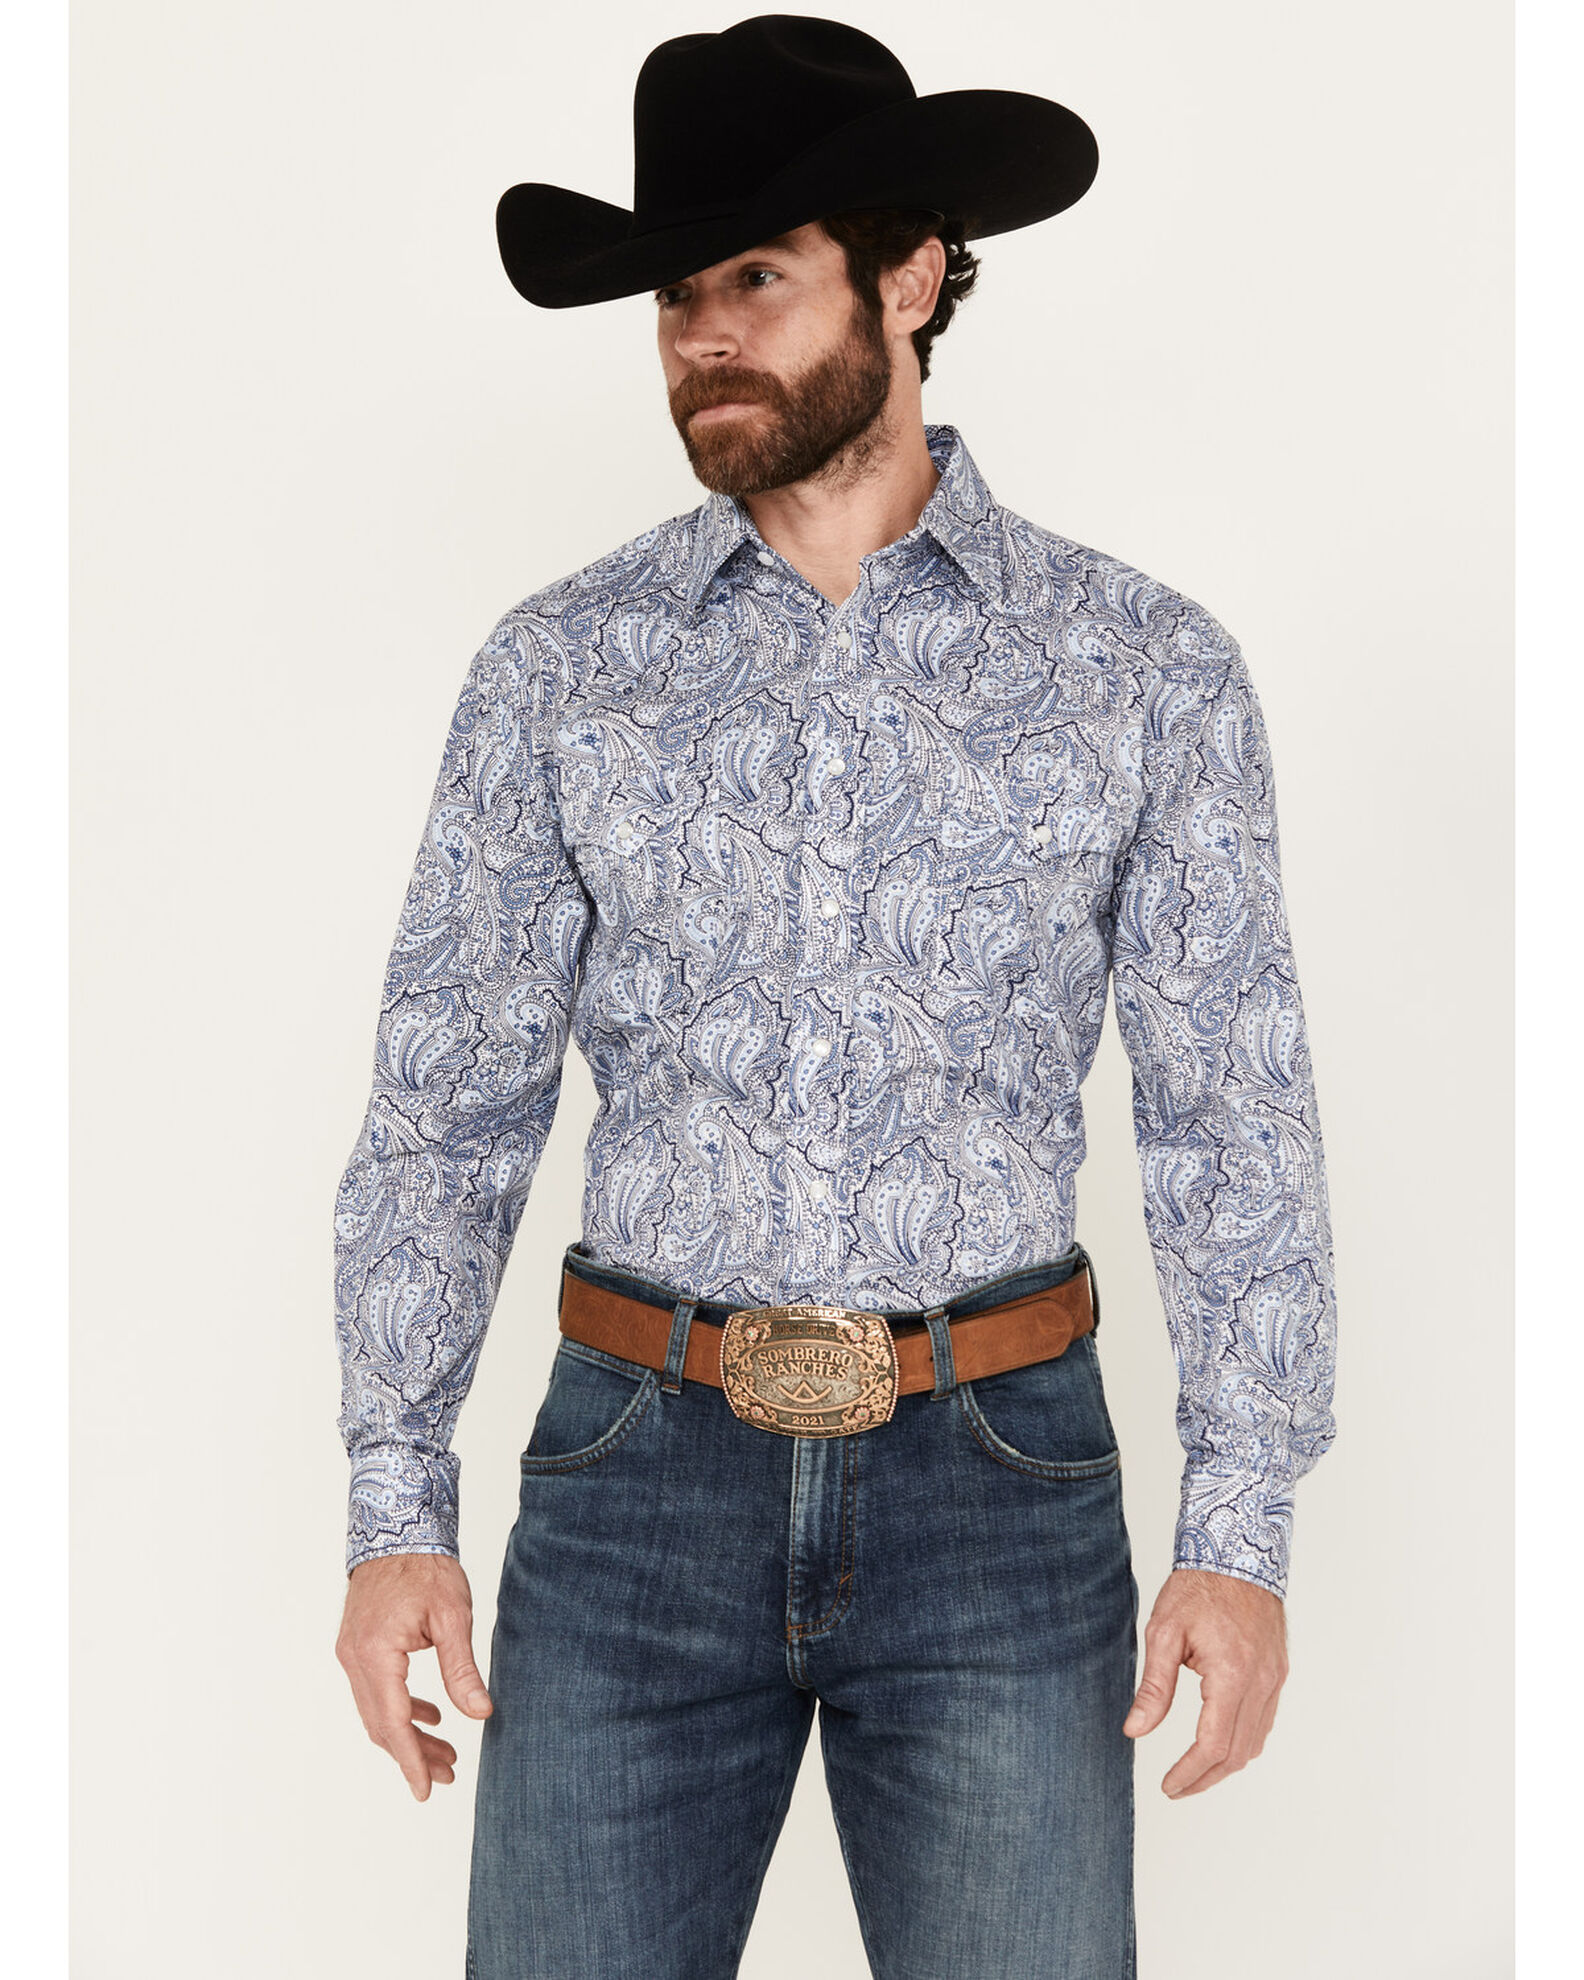 Rough Stock by Panhandle Men's Paisley Print Long Sleeve Pearl Snap Western Shirt